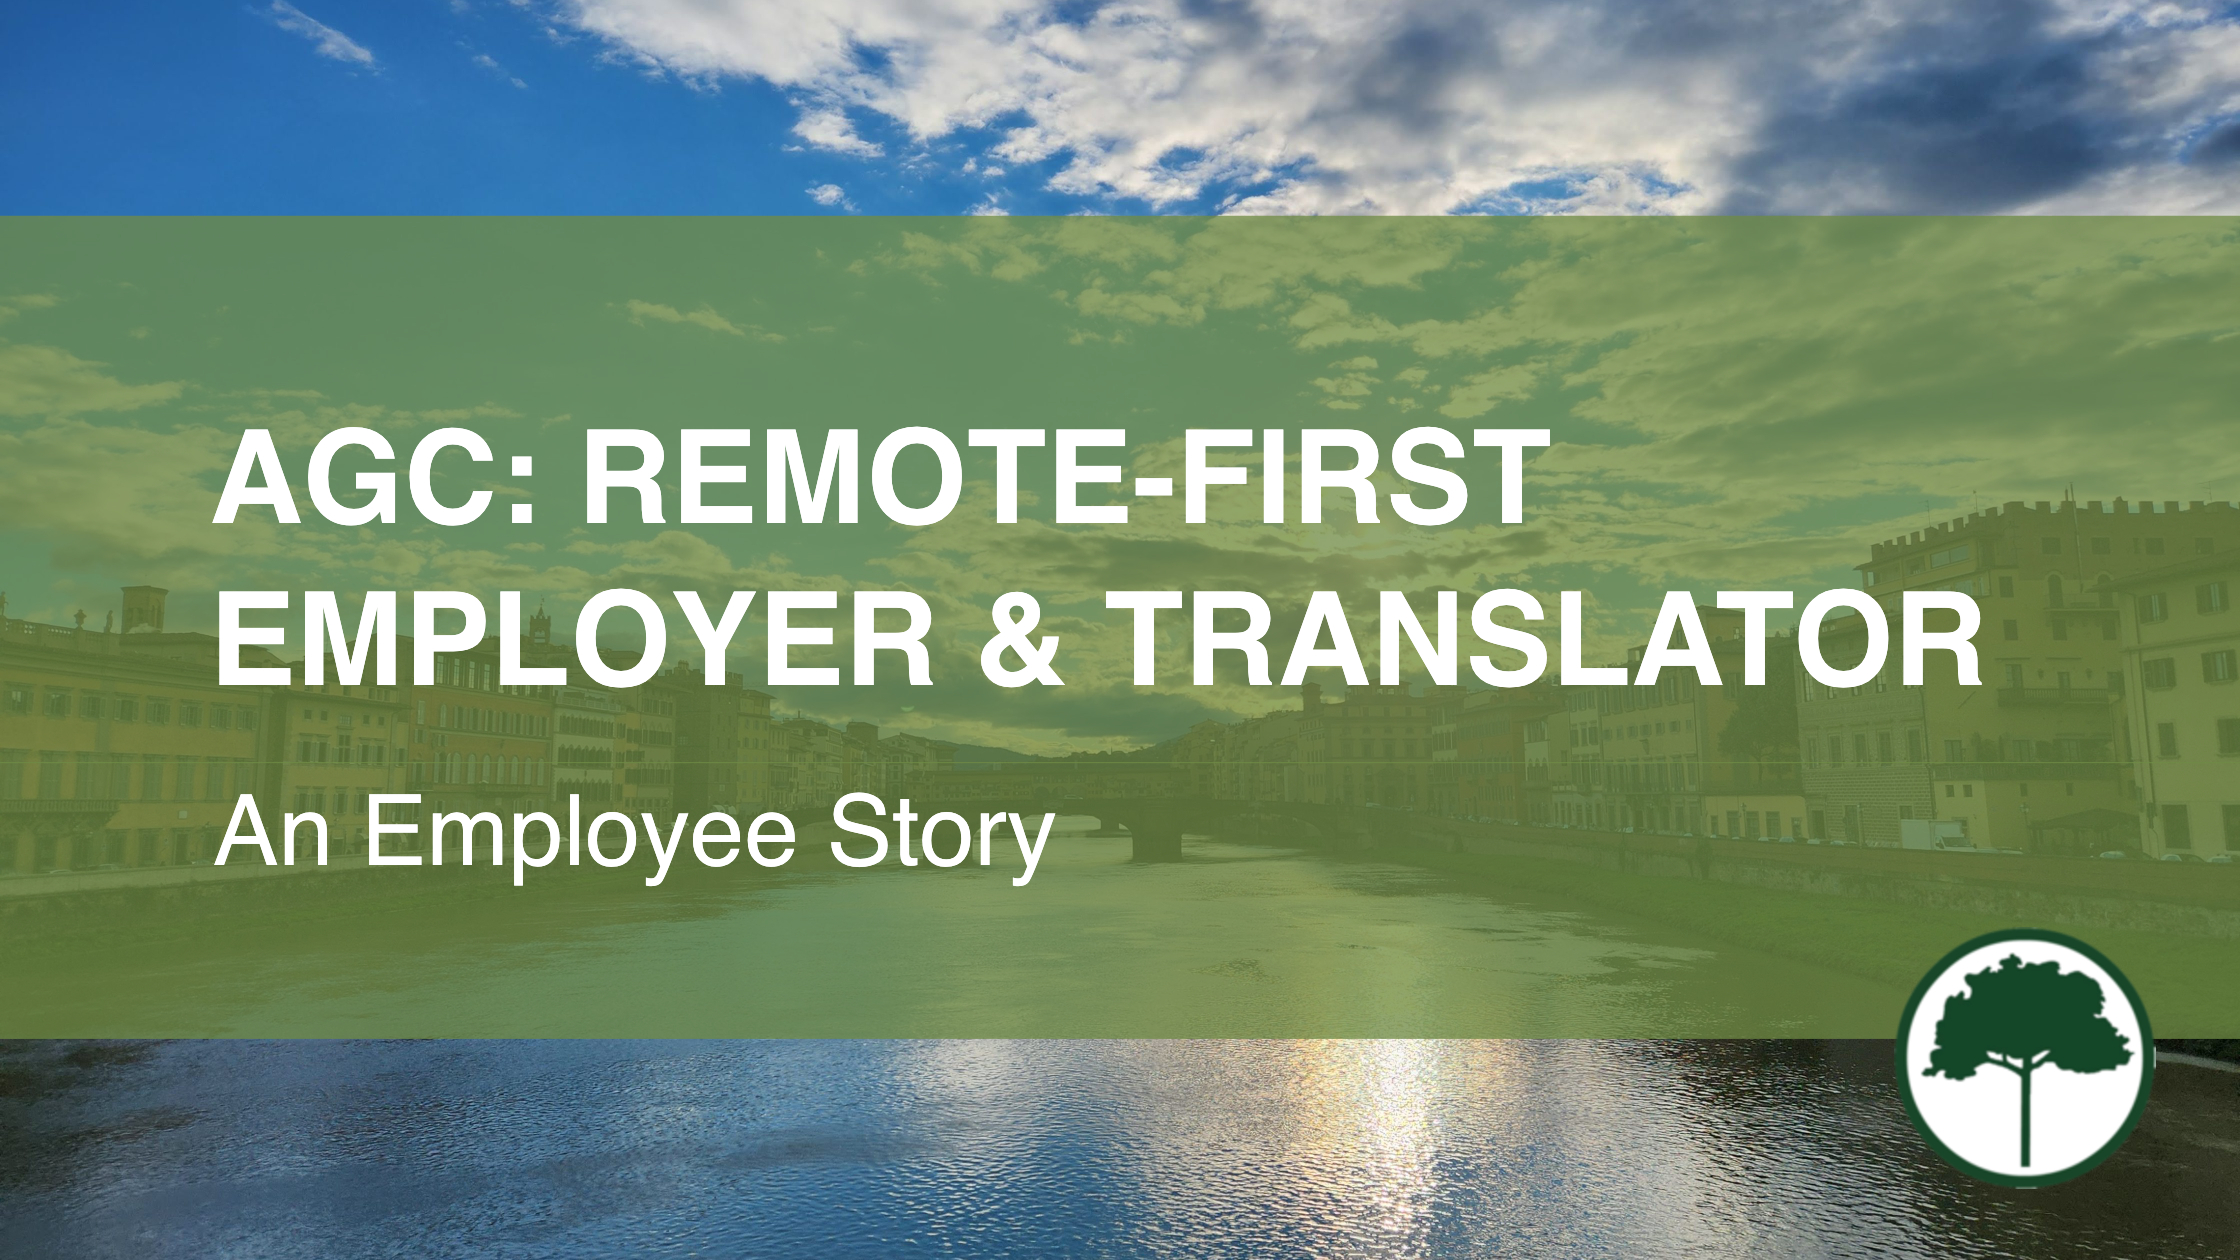 The background is a beautiful blue sky and shimmering water below. The text reads: "AGC: Remote-first Employer and Translator"